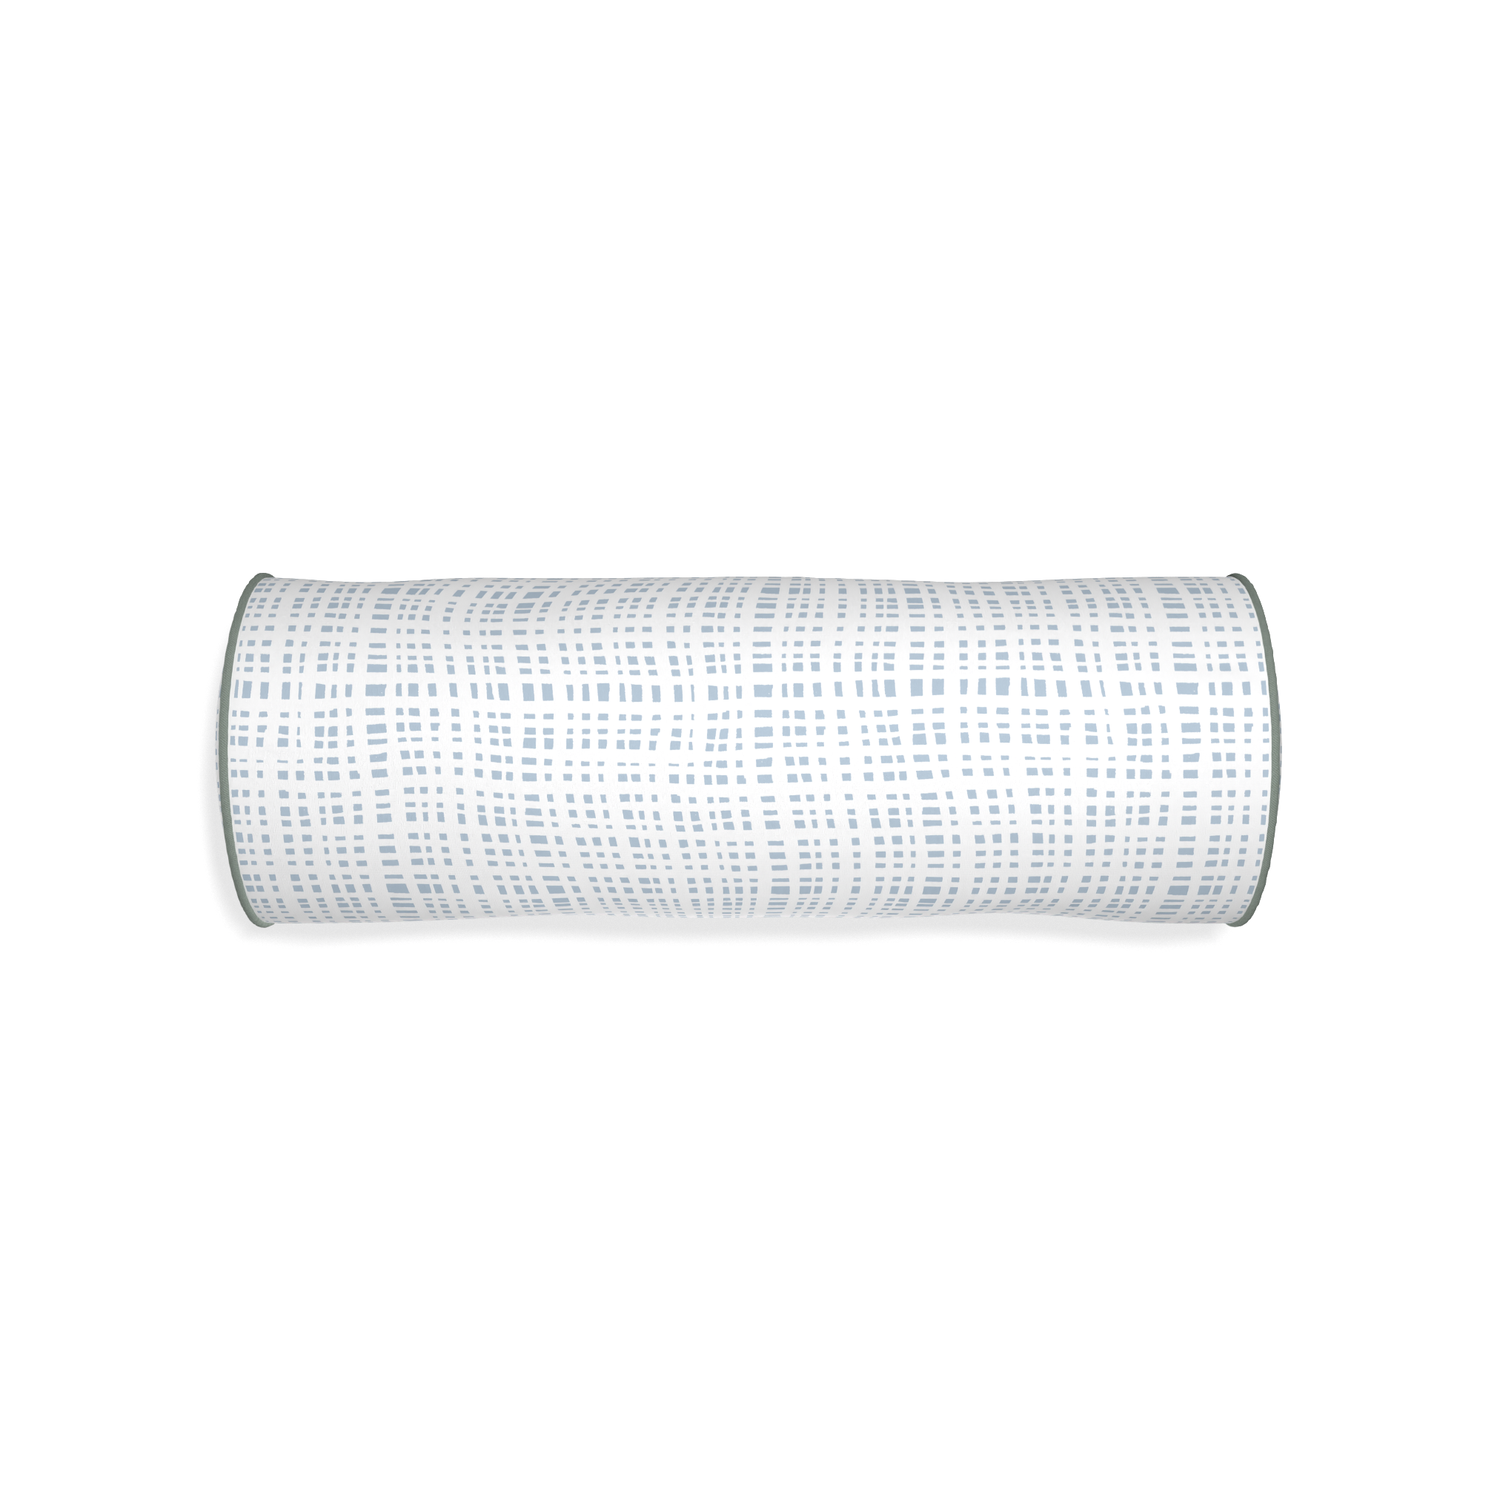 Bolster ginger sky custom plaid sky bluepillow with sage piping on white background